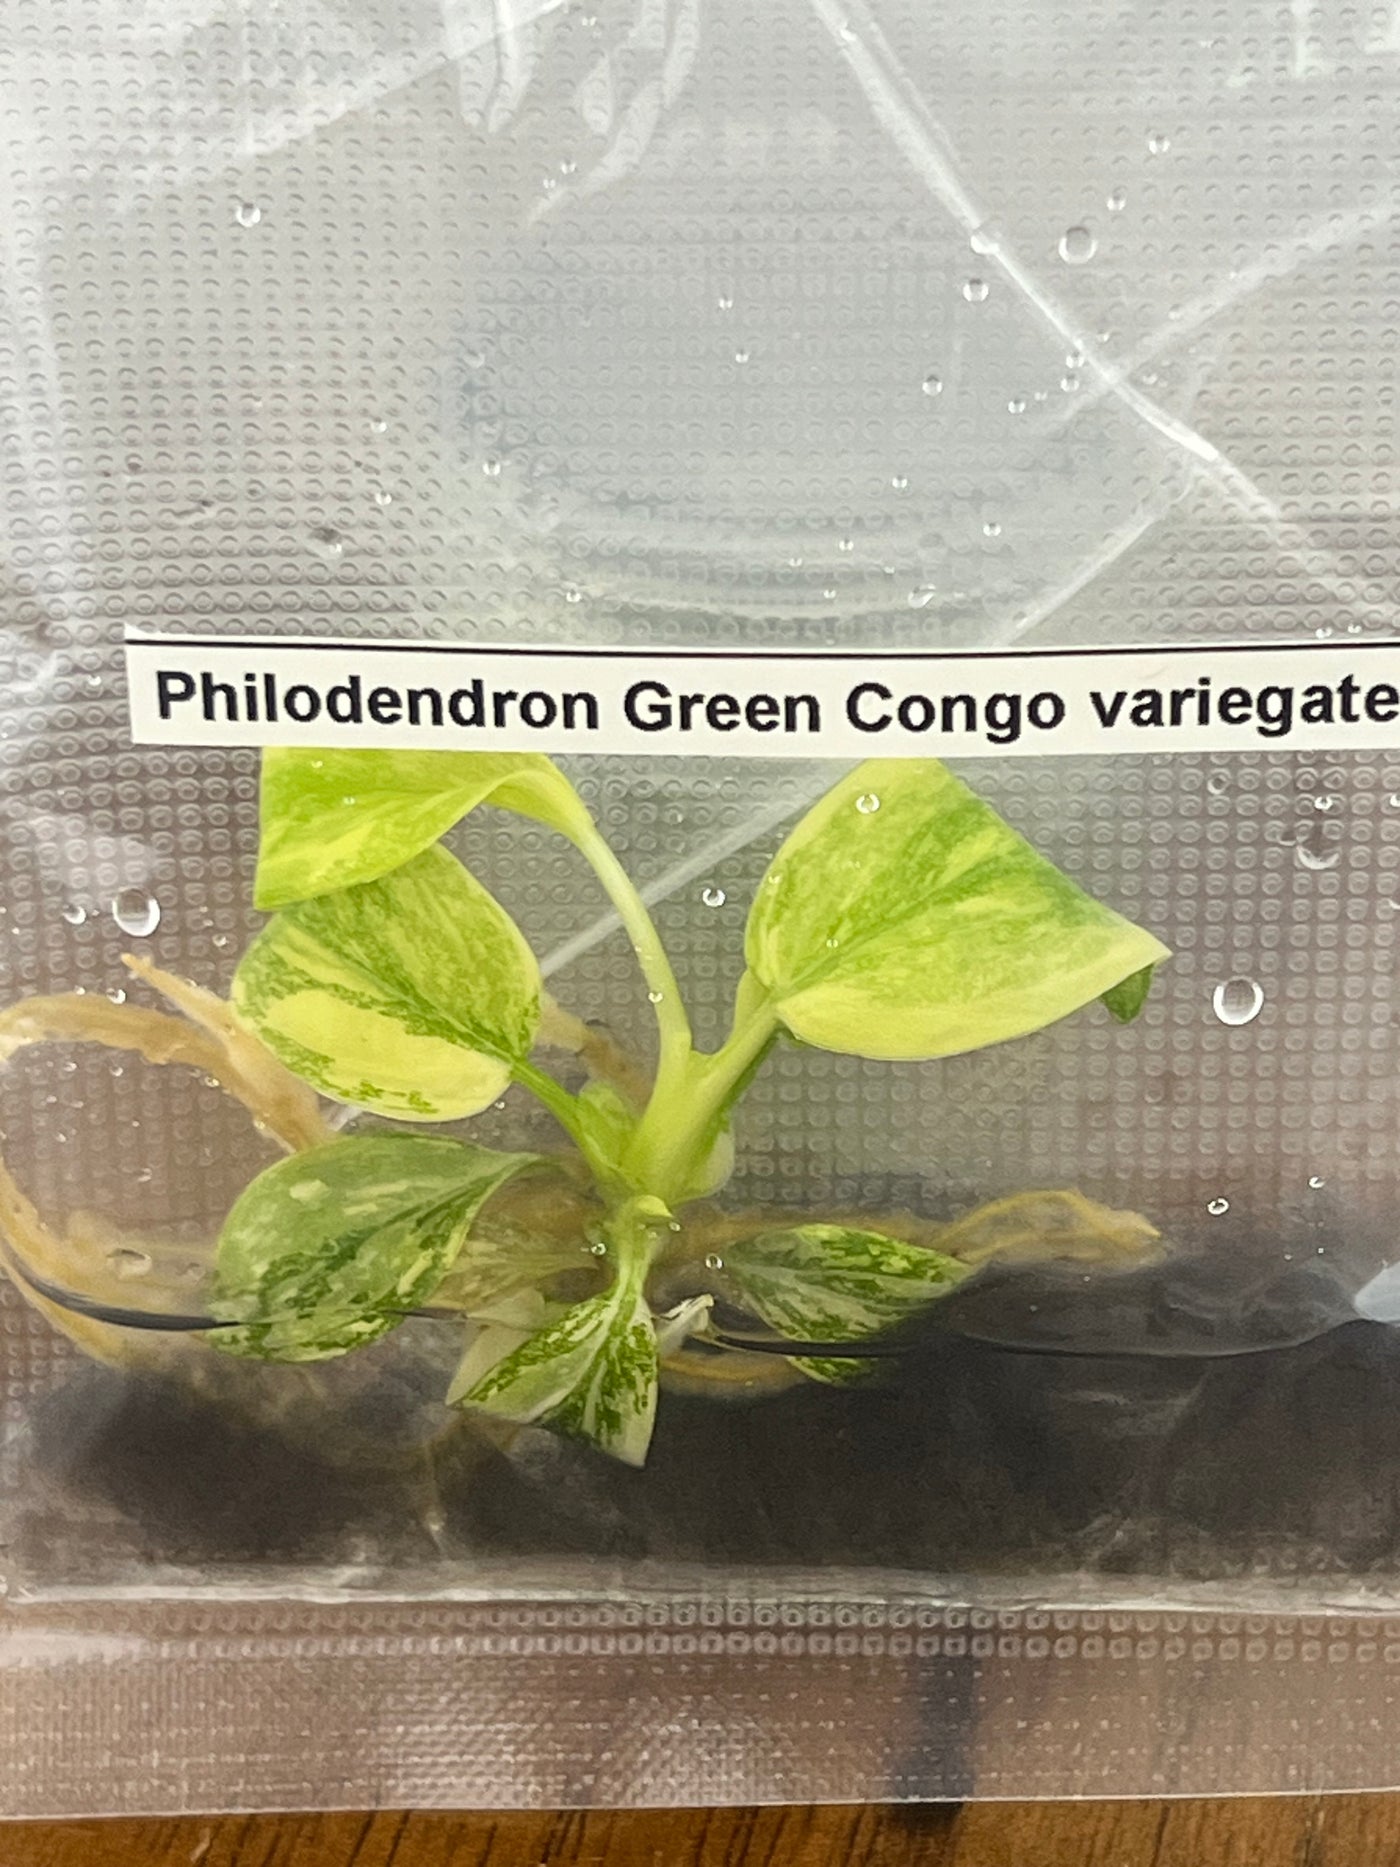 Philodendron Variegated Green Congo (Nuclear) Plantlet (1)